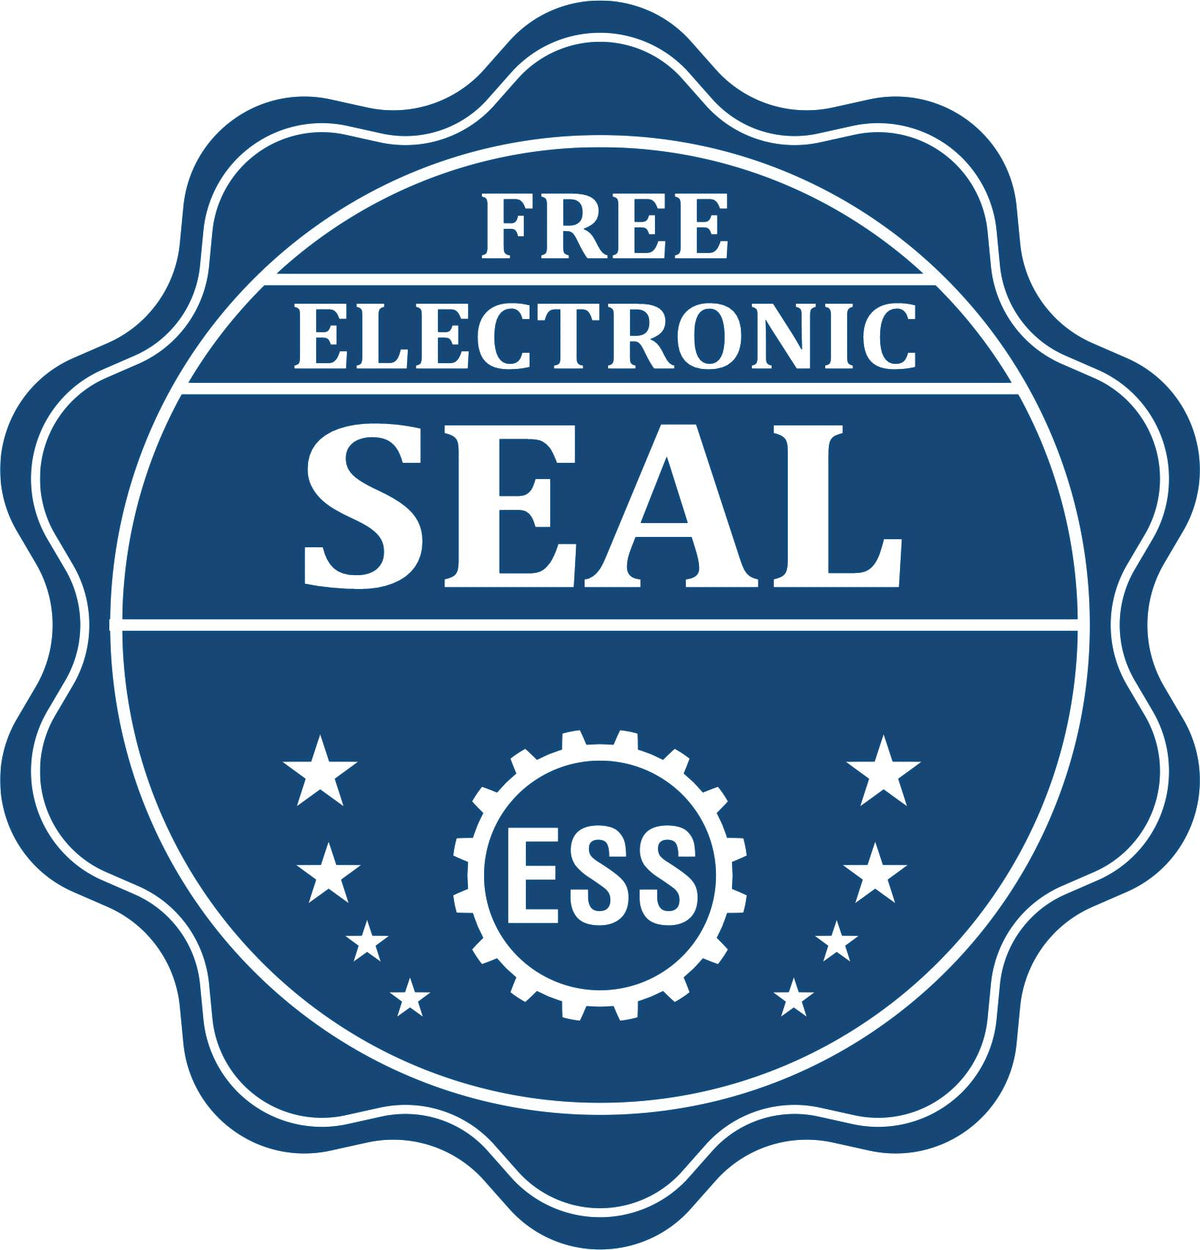 A badge showing a free electronic seal for the Extended Long Reach Washington Architect Seal Embosser with stars and the ESS gear on the emblem.